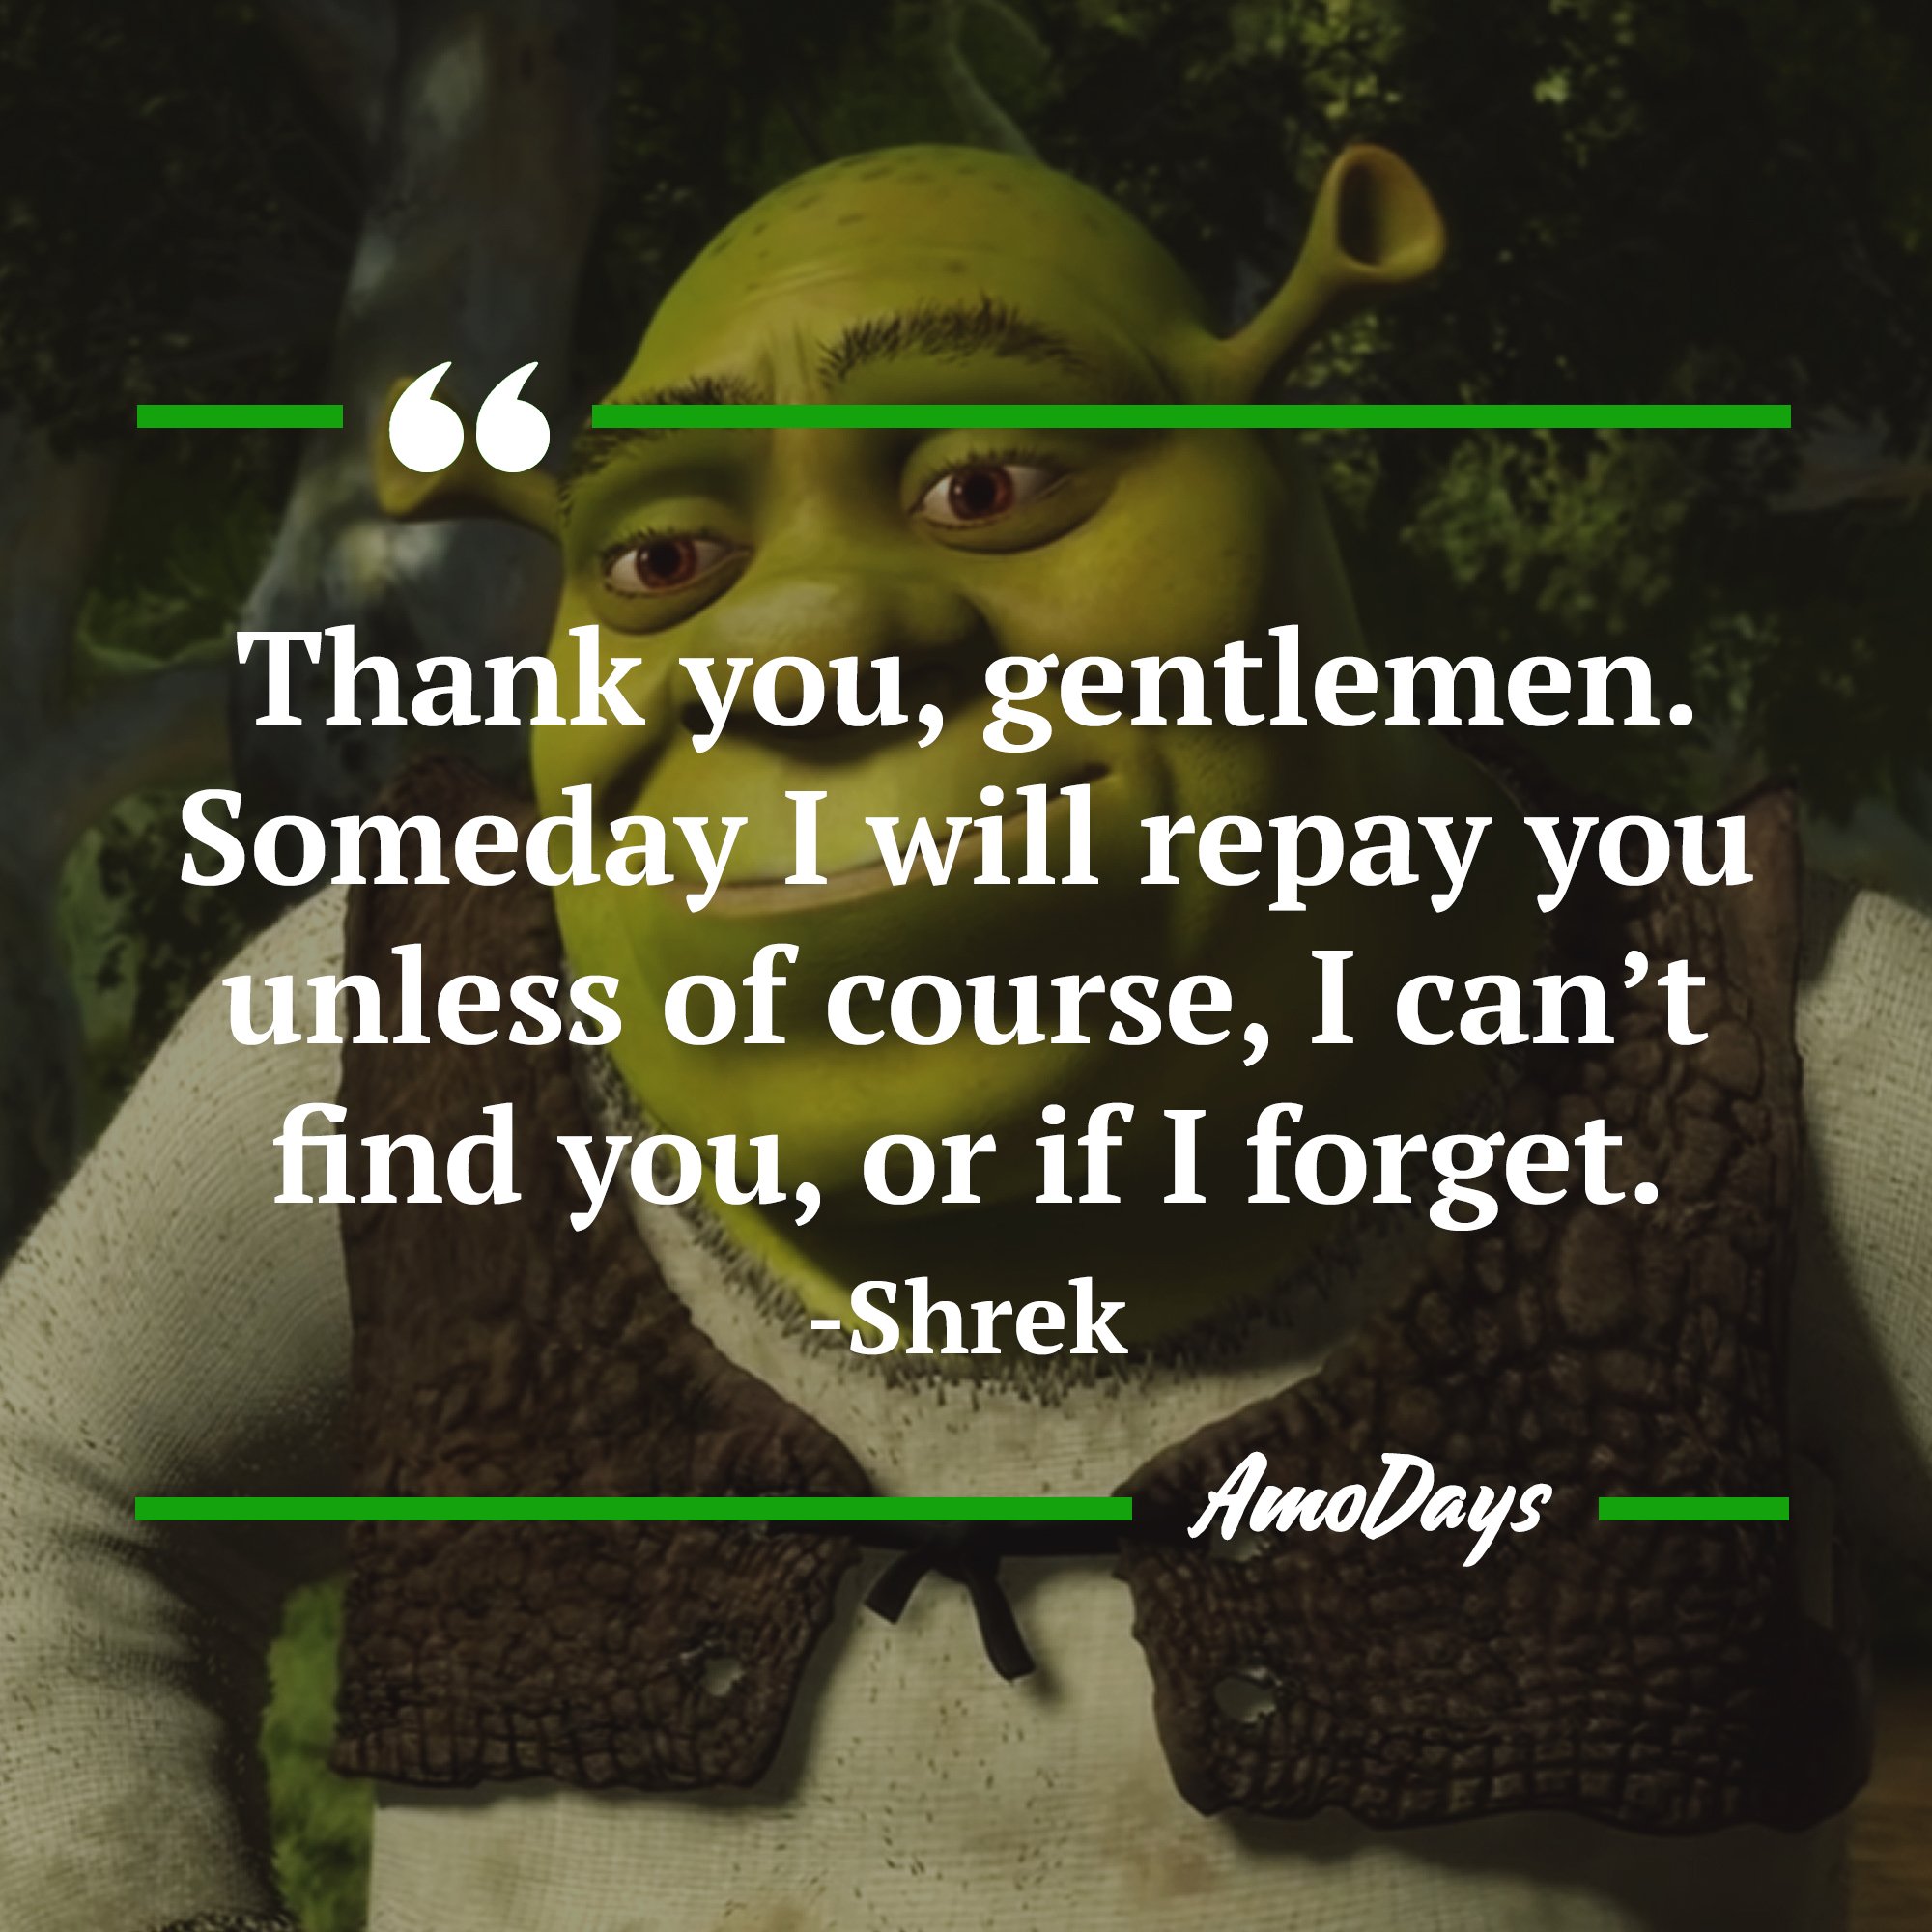 Shrek's quote: “Thank you, gentlemen. Someday I will repay you unless of course, I can’t find you, or if I forget.”  Image: AmoDays